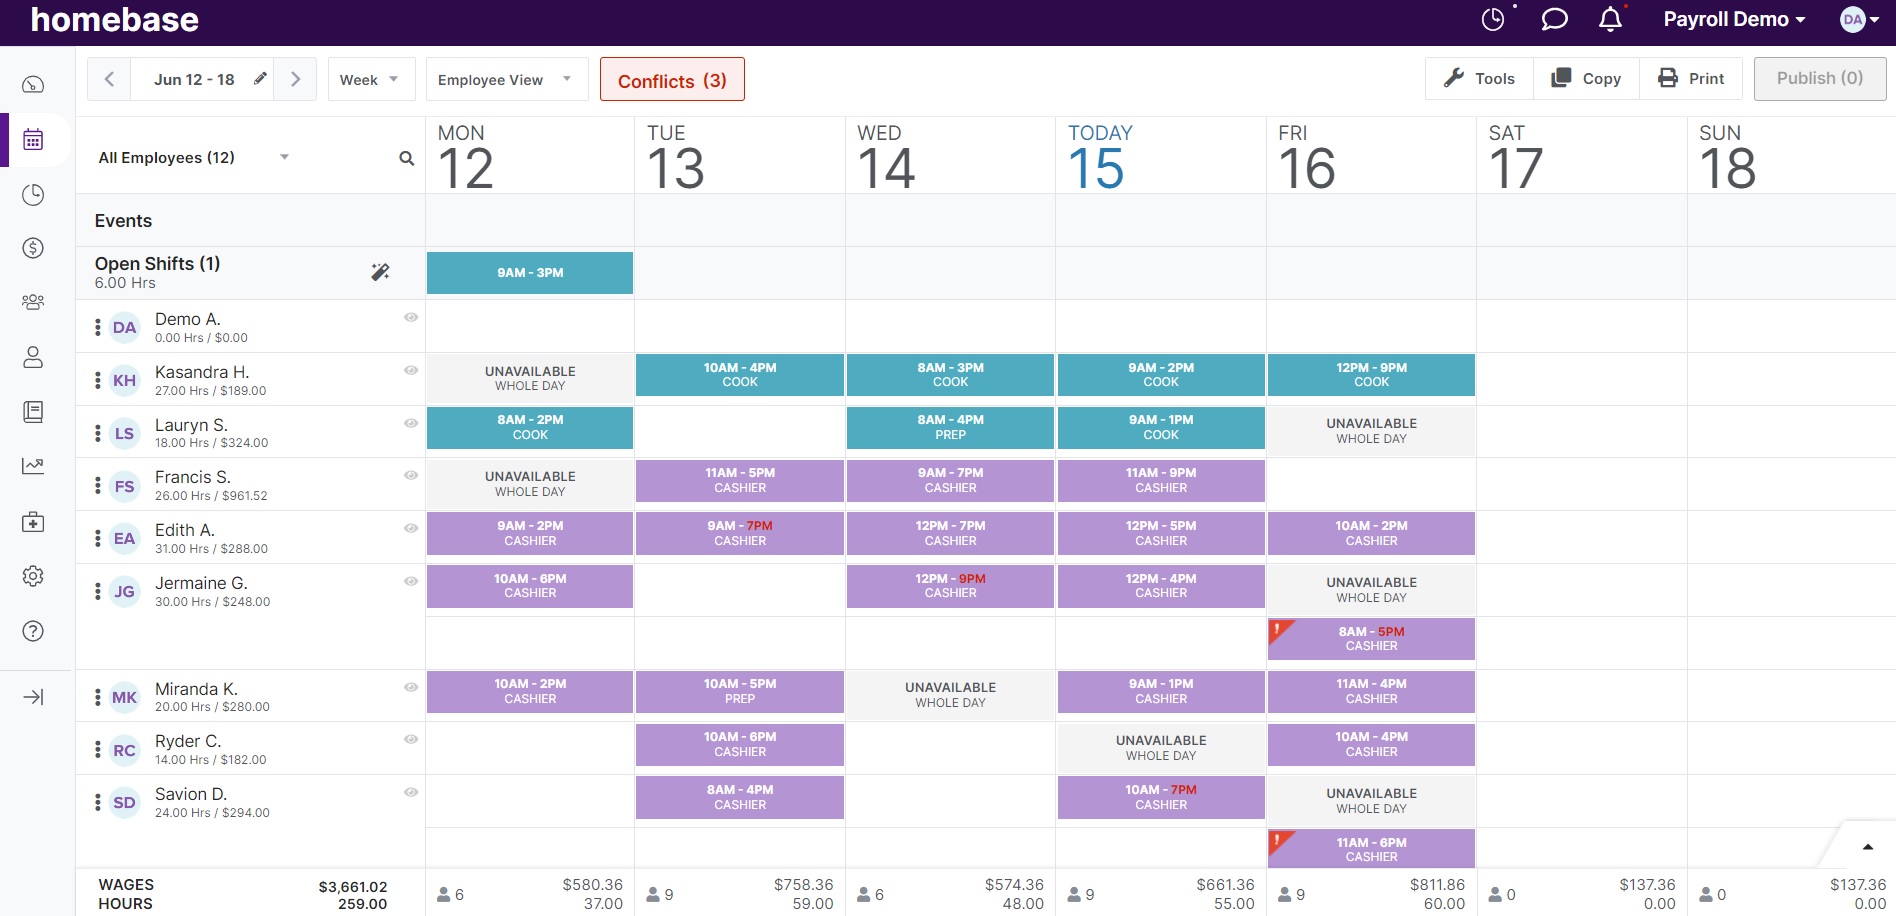 A view of the Homebase scheduling dashboard